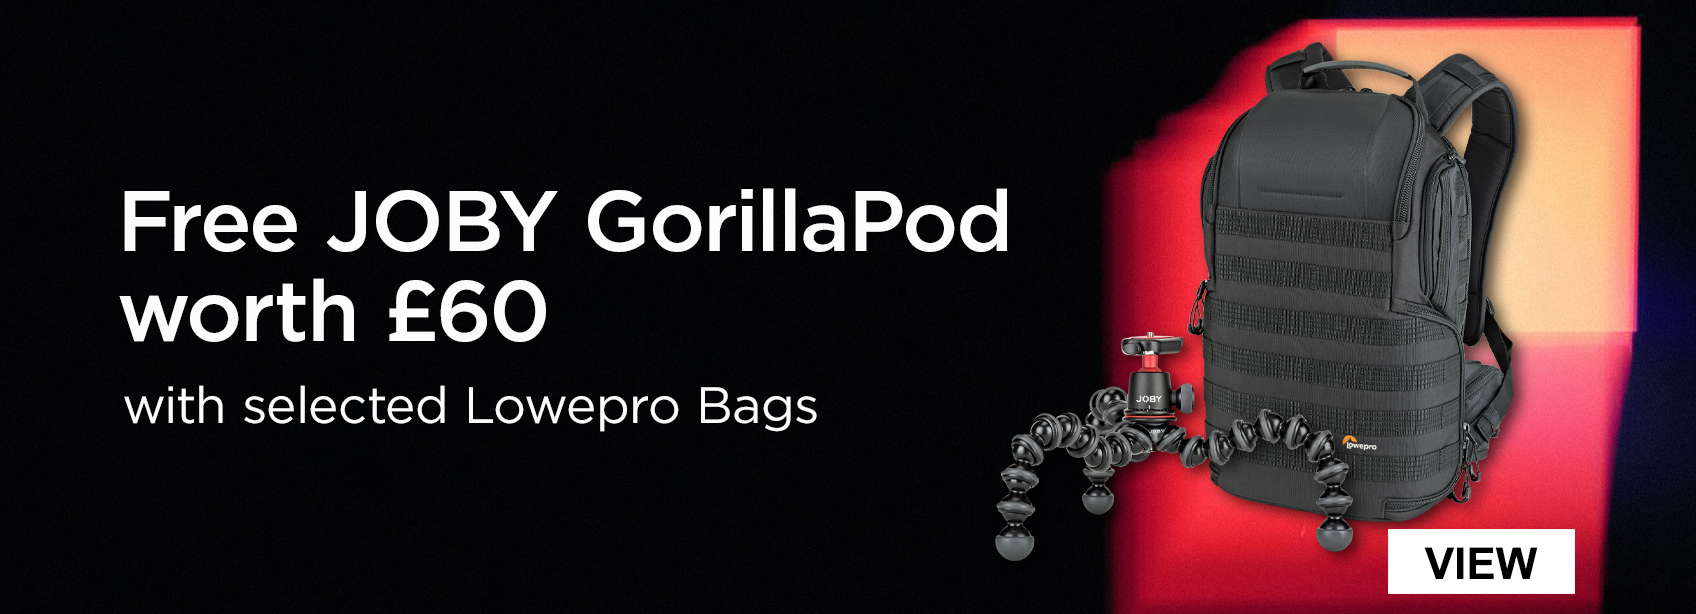 Free JOBY GorillaPod worth £60 with selected Lowepro Bags